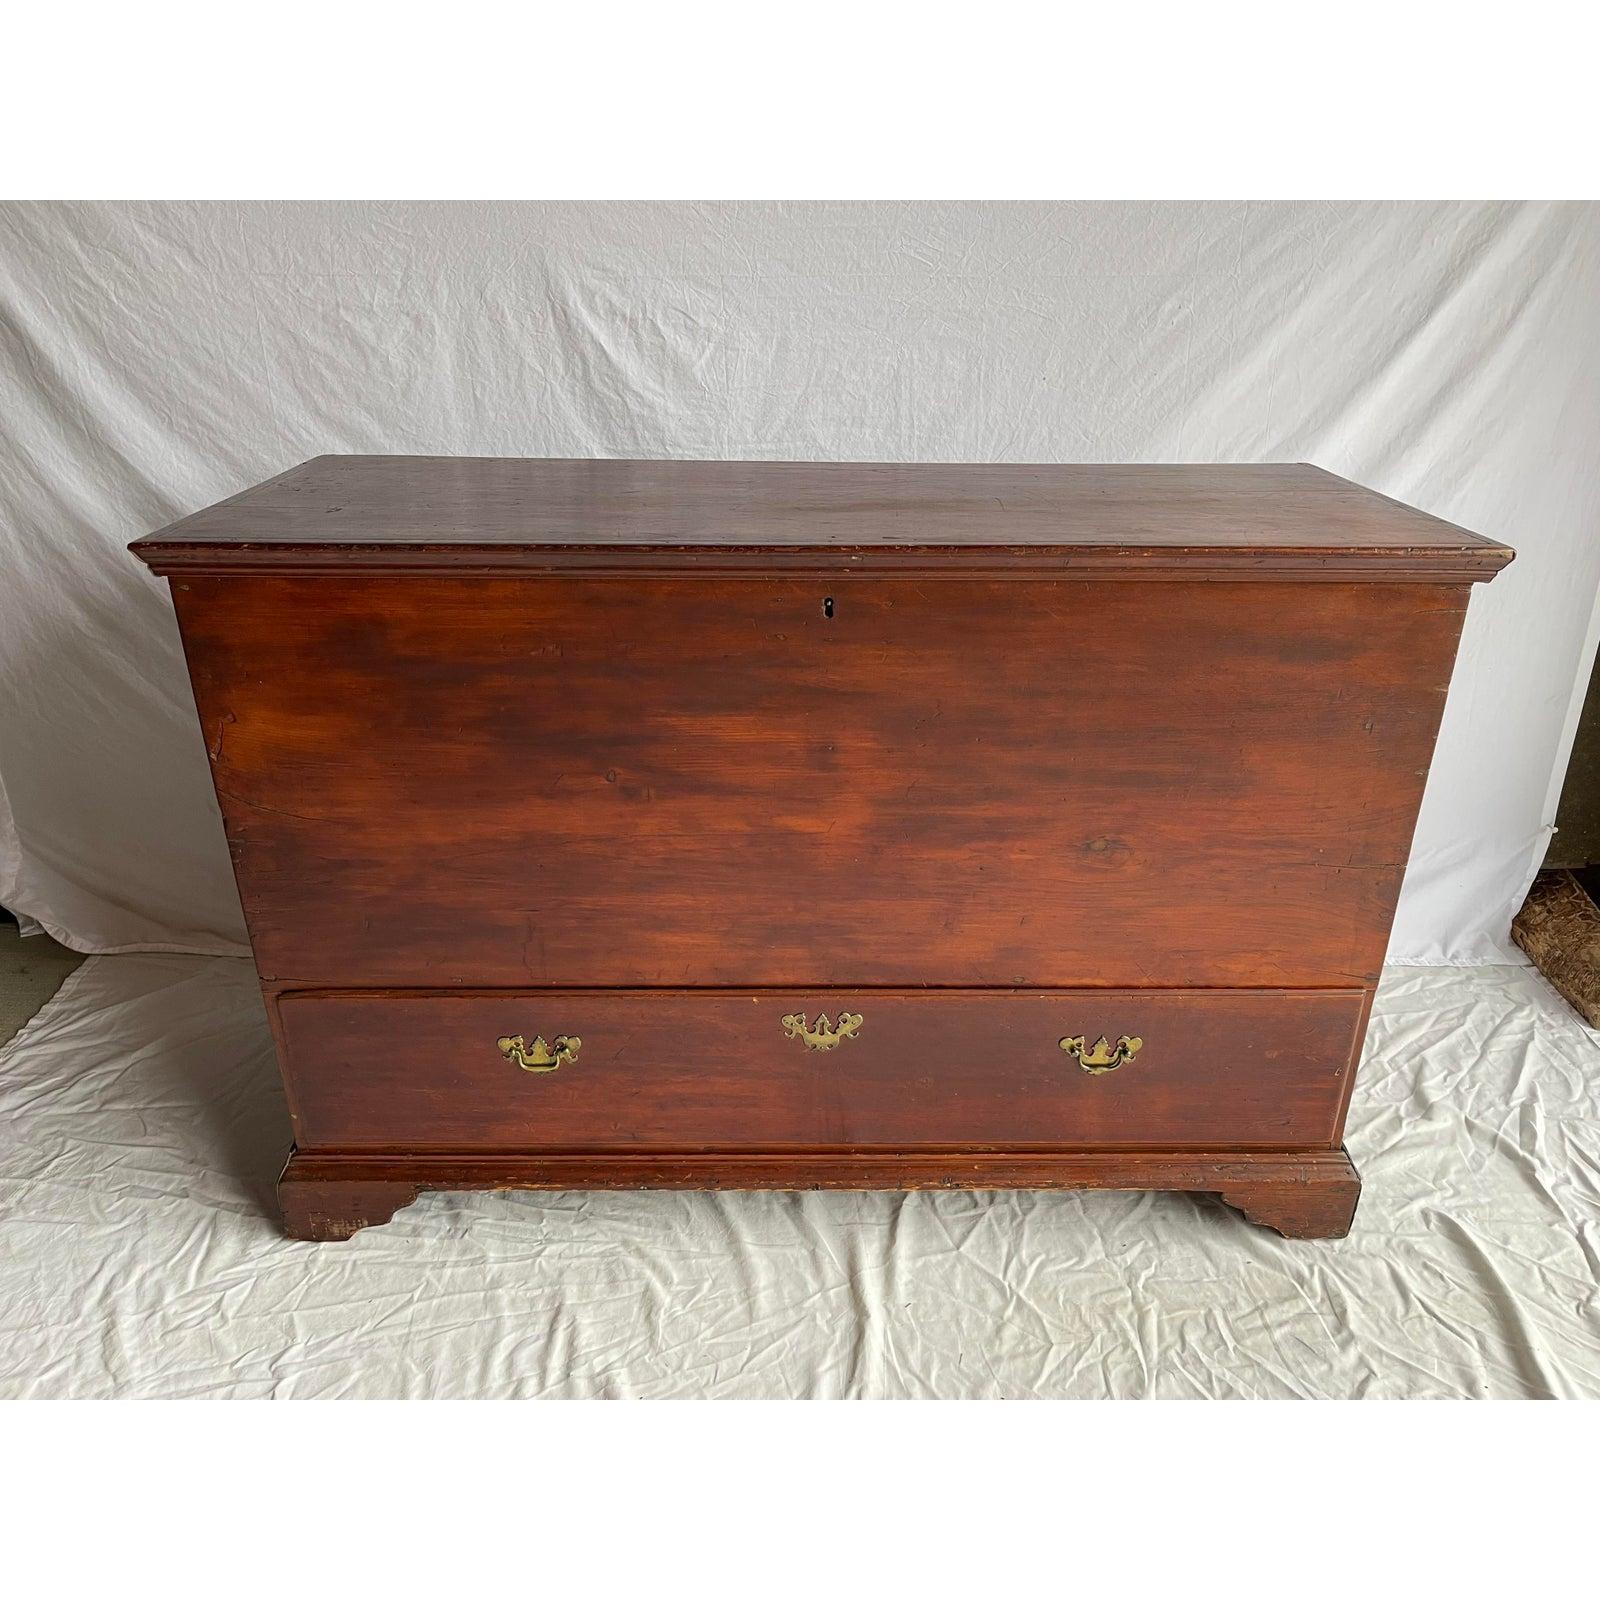 A scarce antique early American country single drawer lift-top faux grain painted blanket chest - mule chest with beautifully aged warm rich patina, circa 1780

Hand-crafted in the New England region of the Northeastern United States in the second